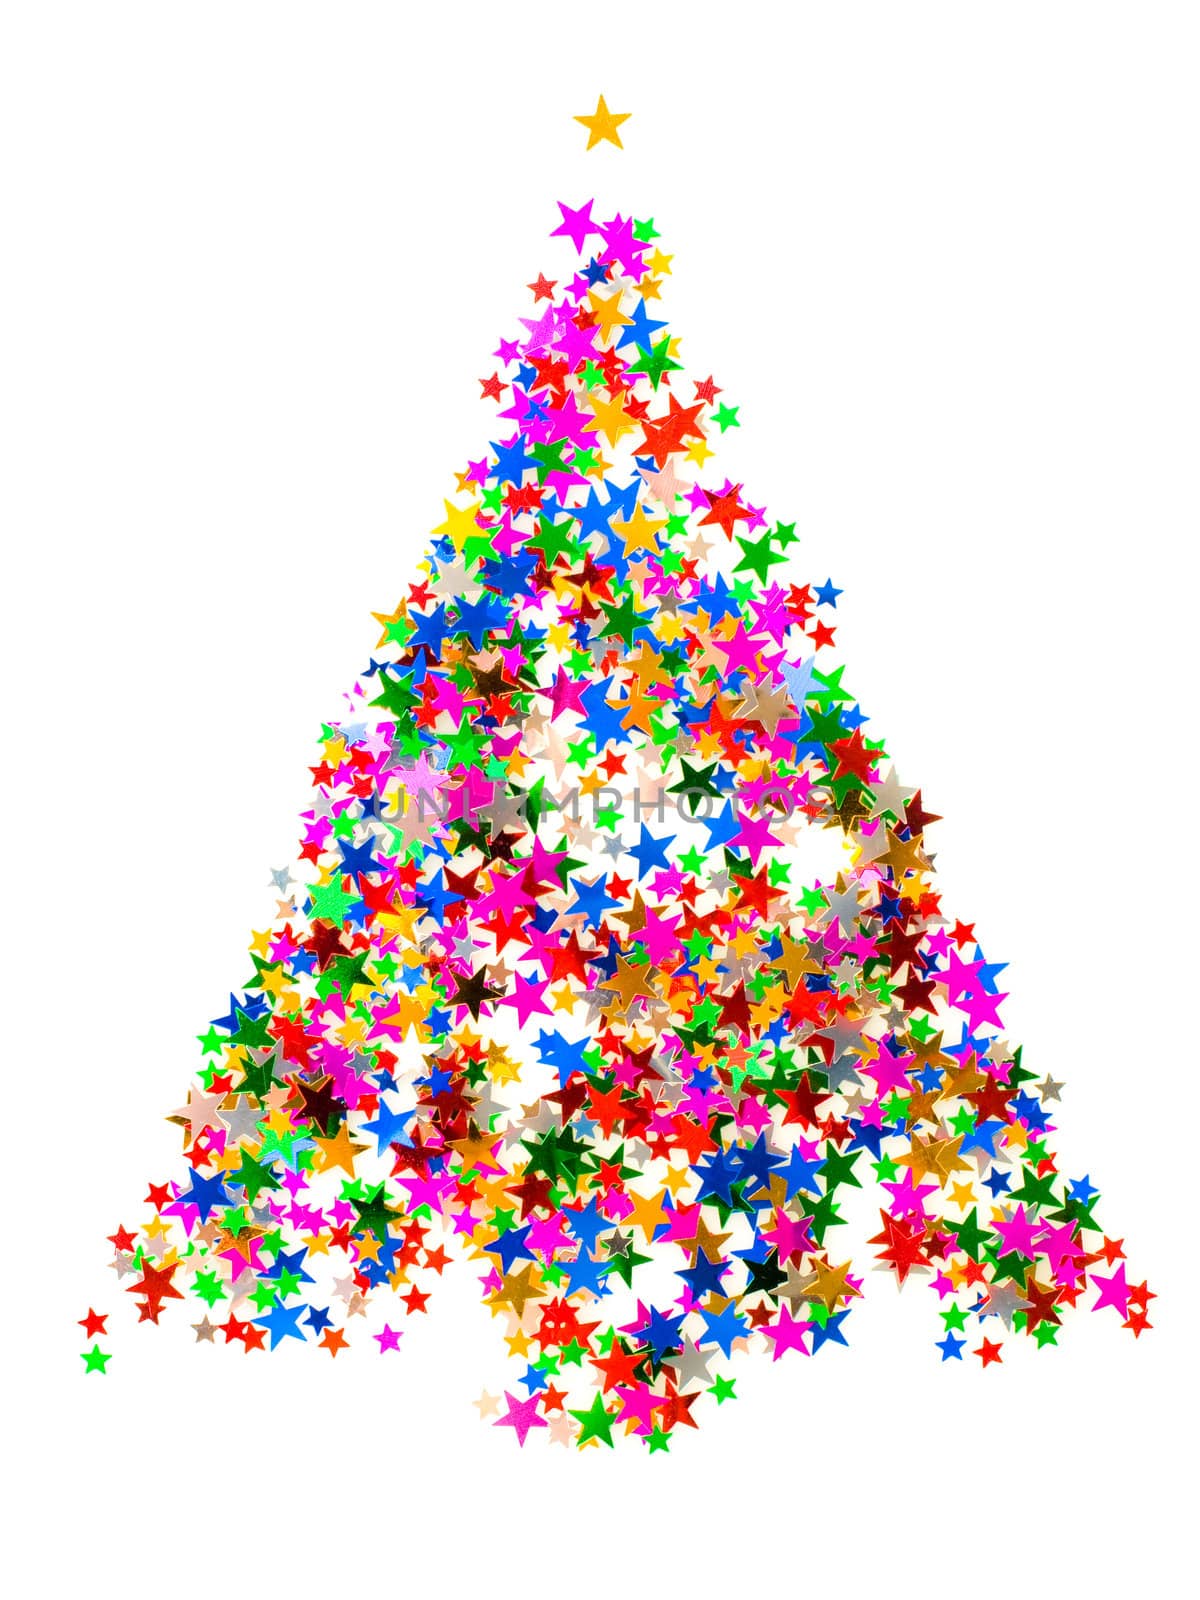 Christmas tree made from star shaped confetti on white